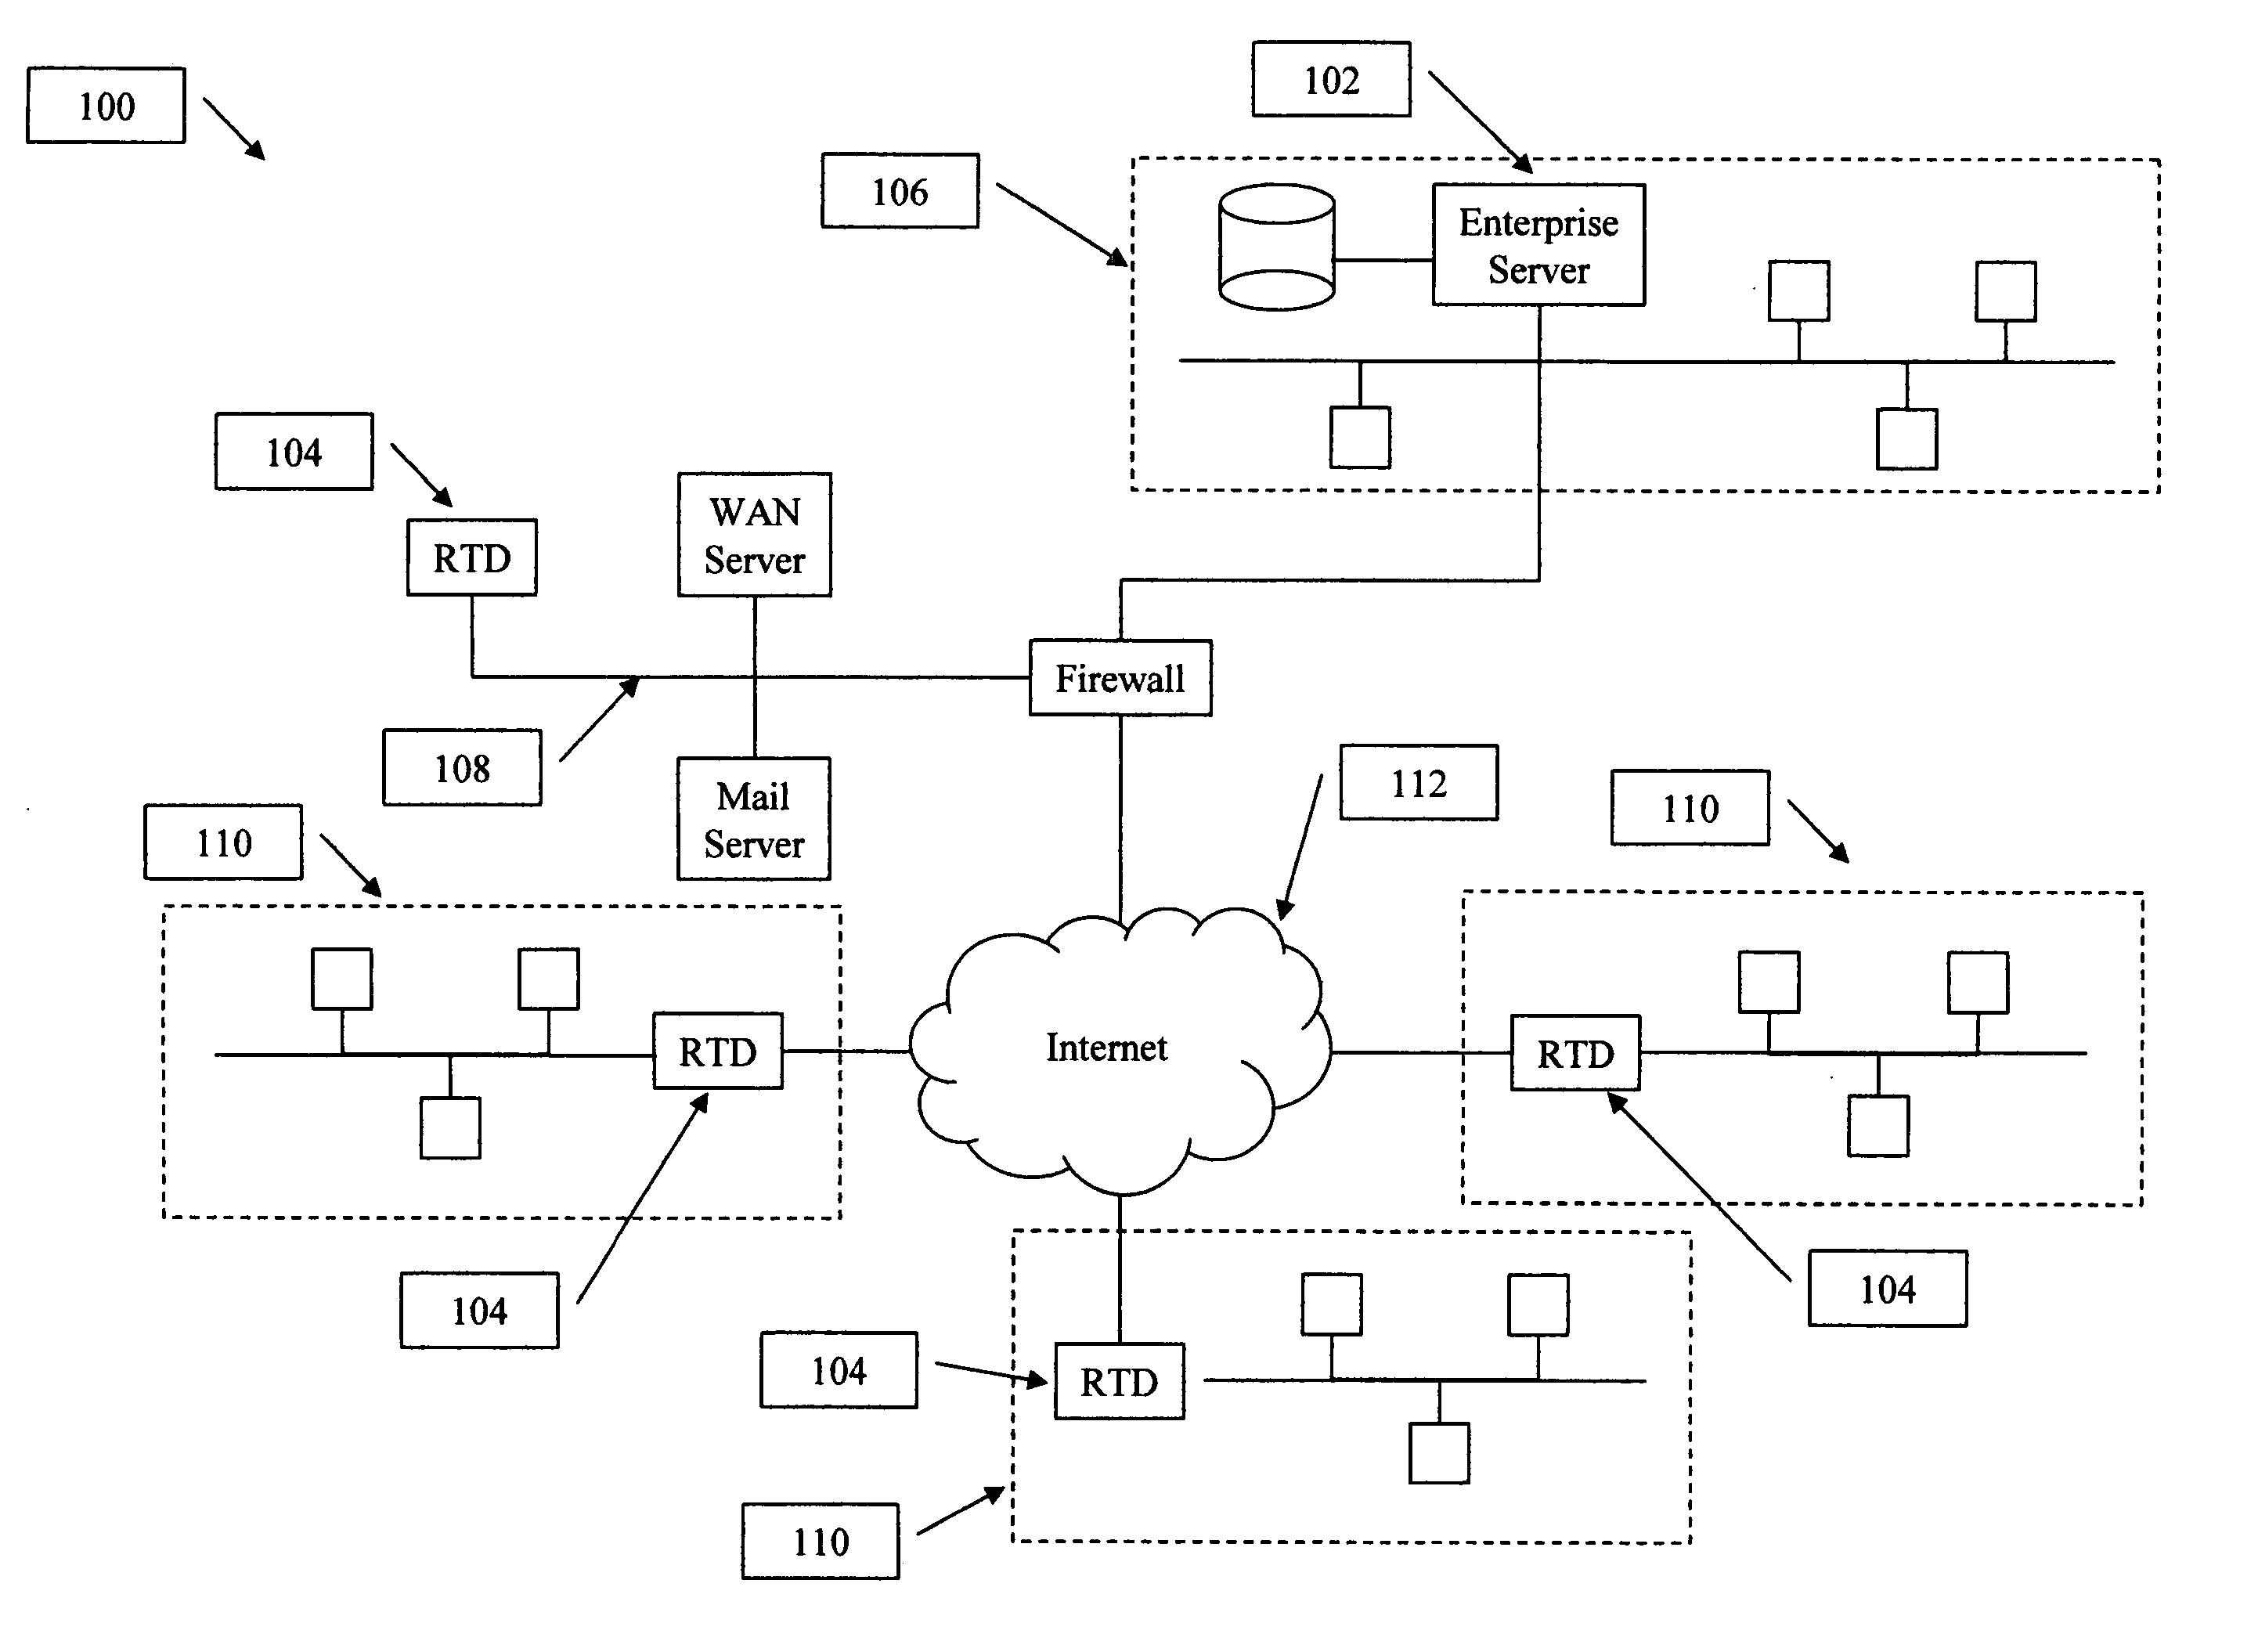 Method to manage network security over a distributed network